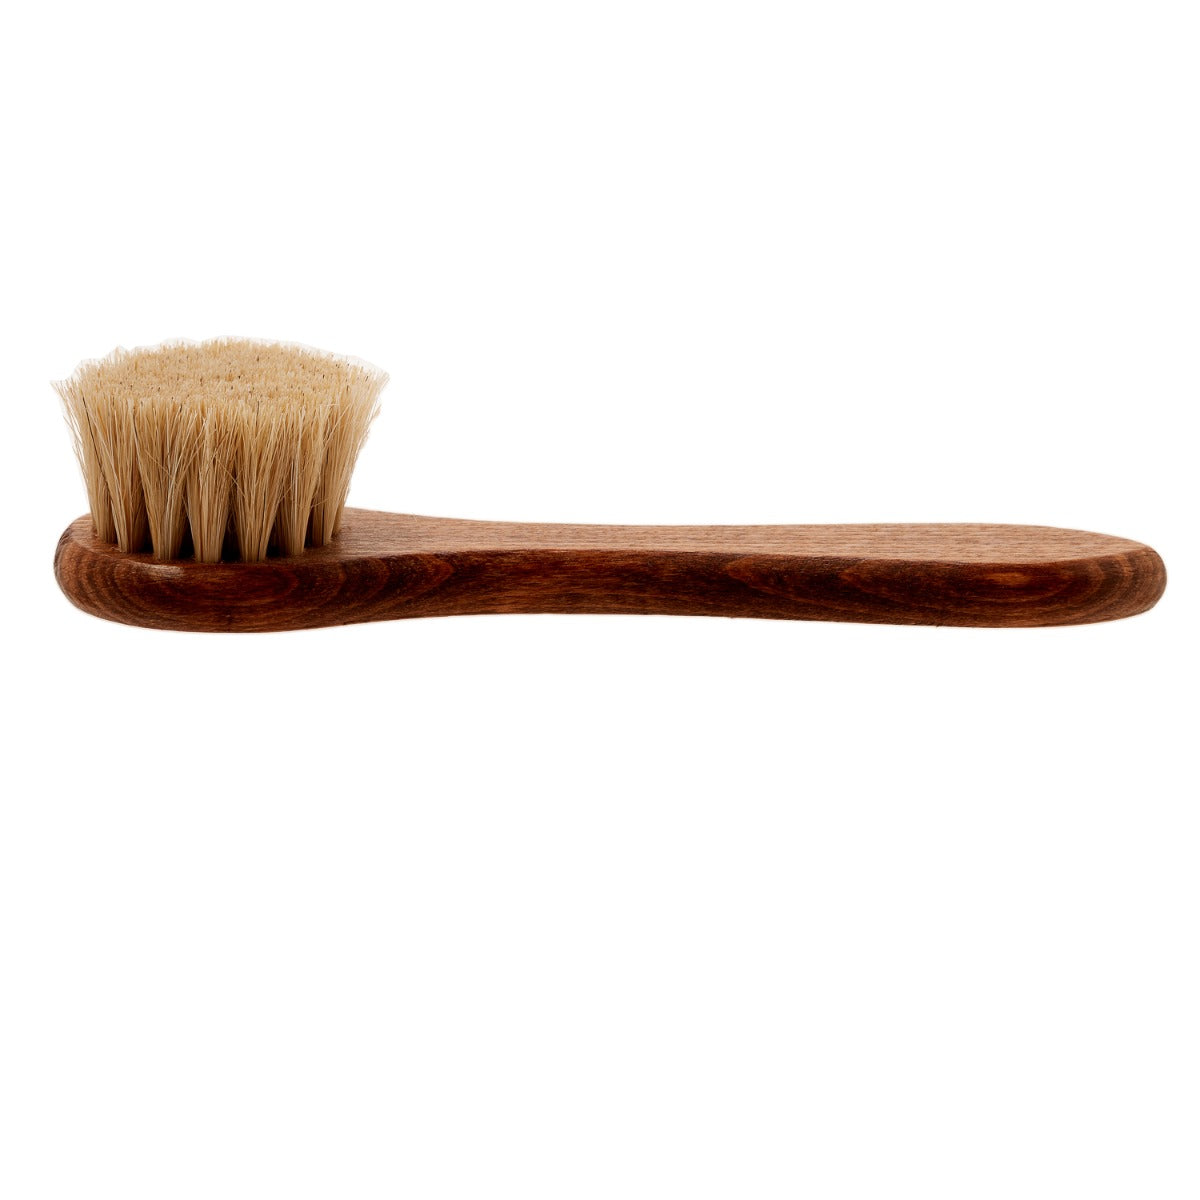 A KirbyAllison.com Wellington Deluxe Shoe Polish Dauber with horsehair bristles on a white background.